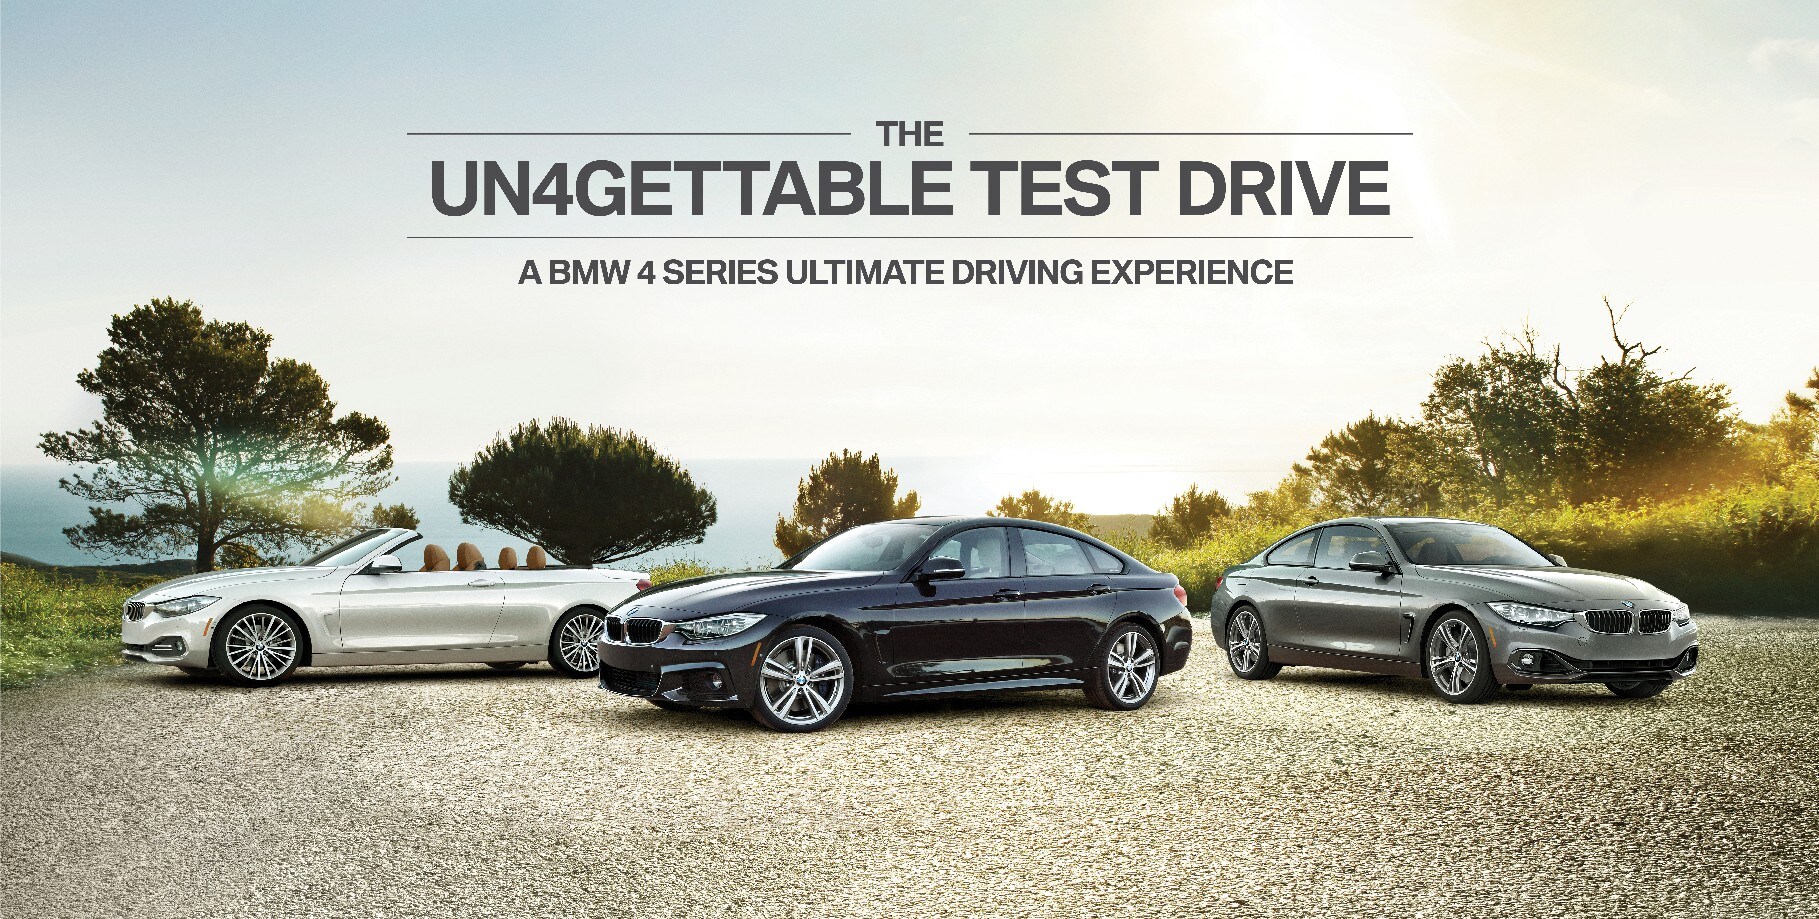 Bmw ultimate drive experience #4